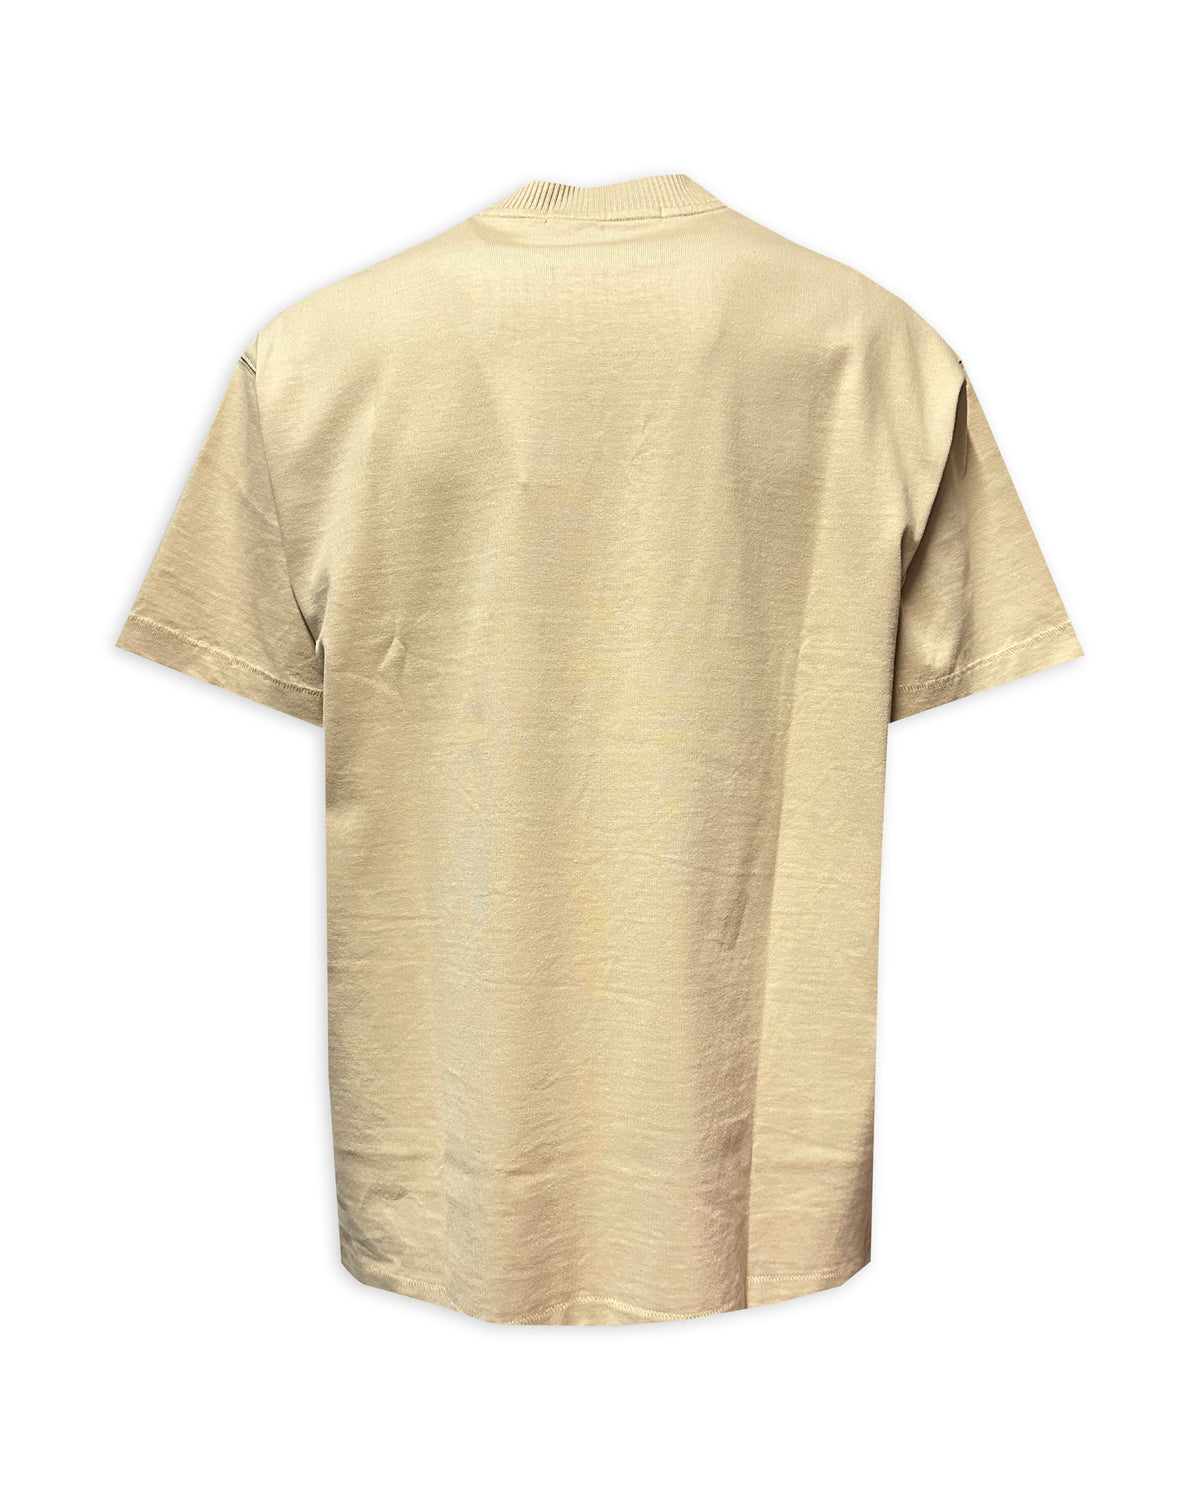 Man Tee Monologo Patched Tee Warm Sand